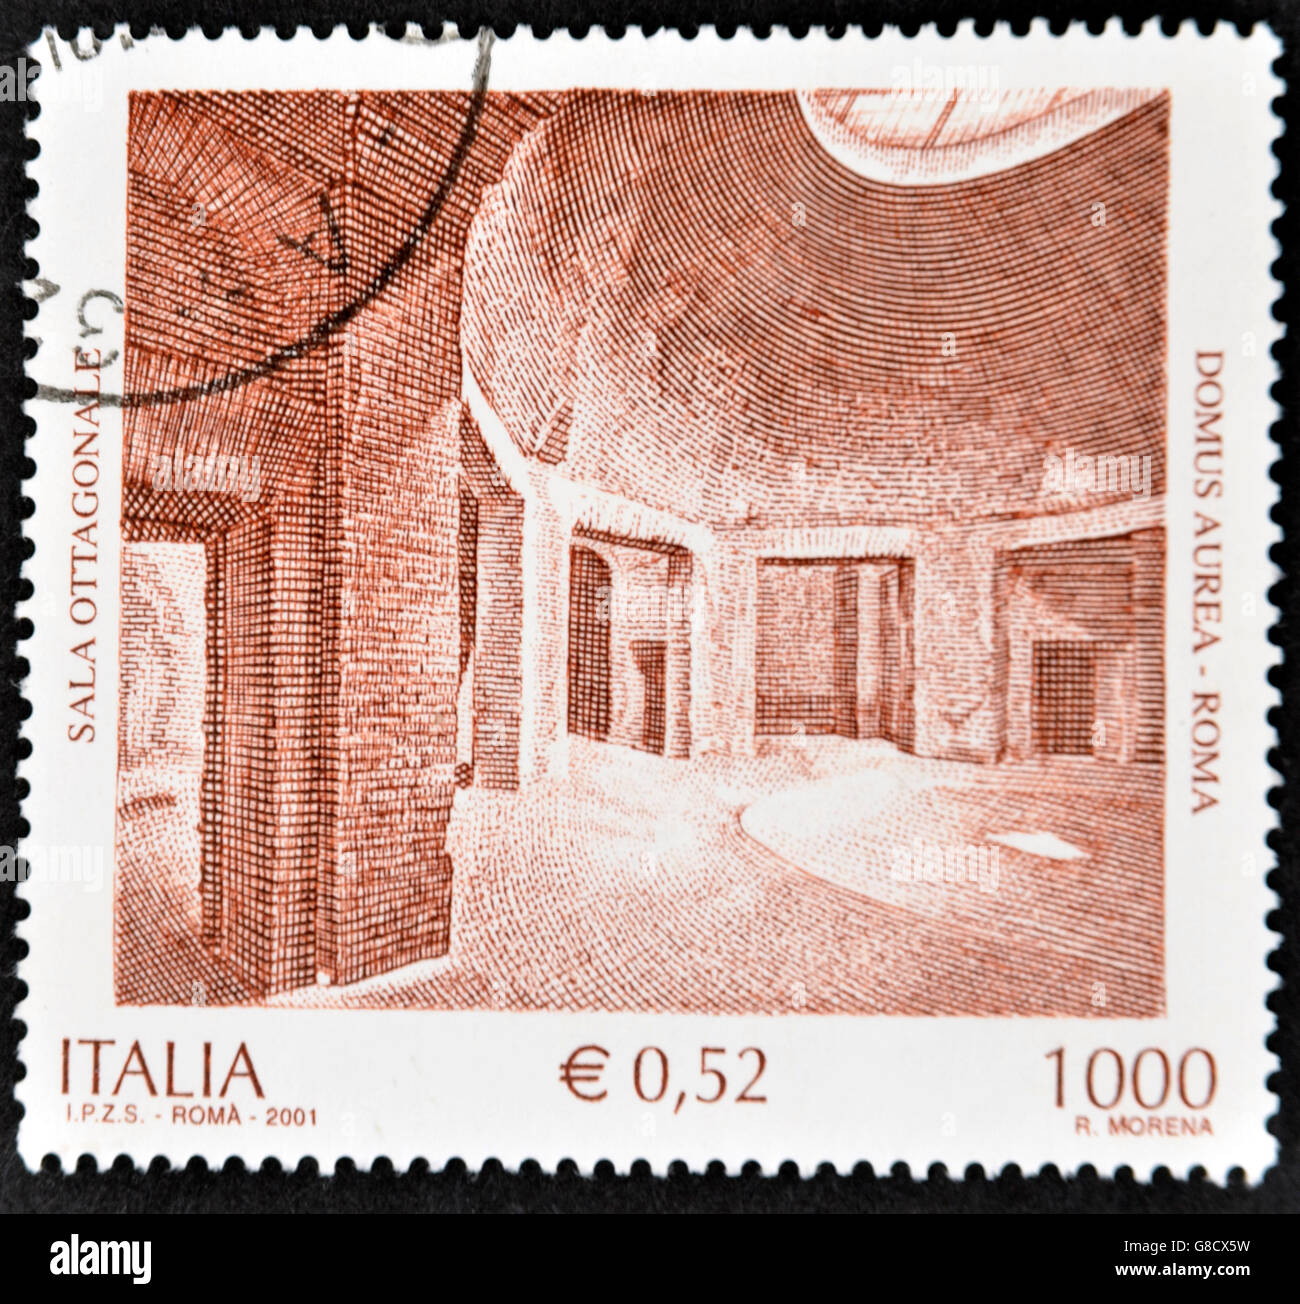 ITALY - CIRCA 2001 A stamp printed in Italy shows the octagonal room of the Domus Aurea in Rome, circa 2001 Stock Photo